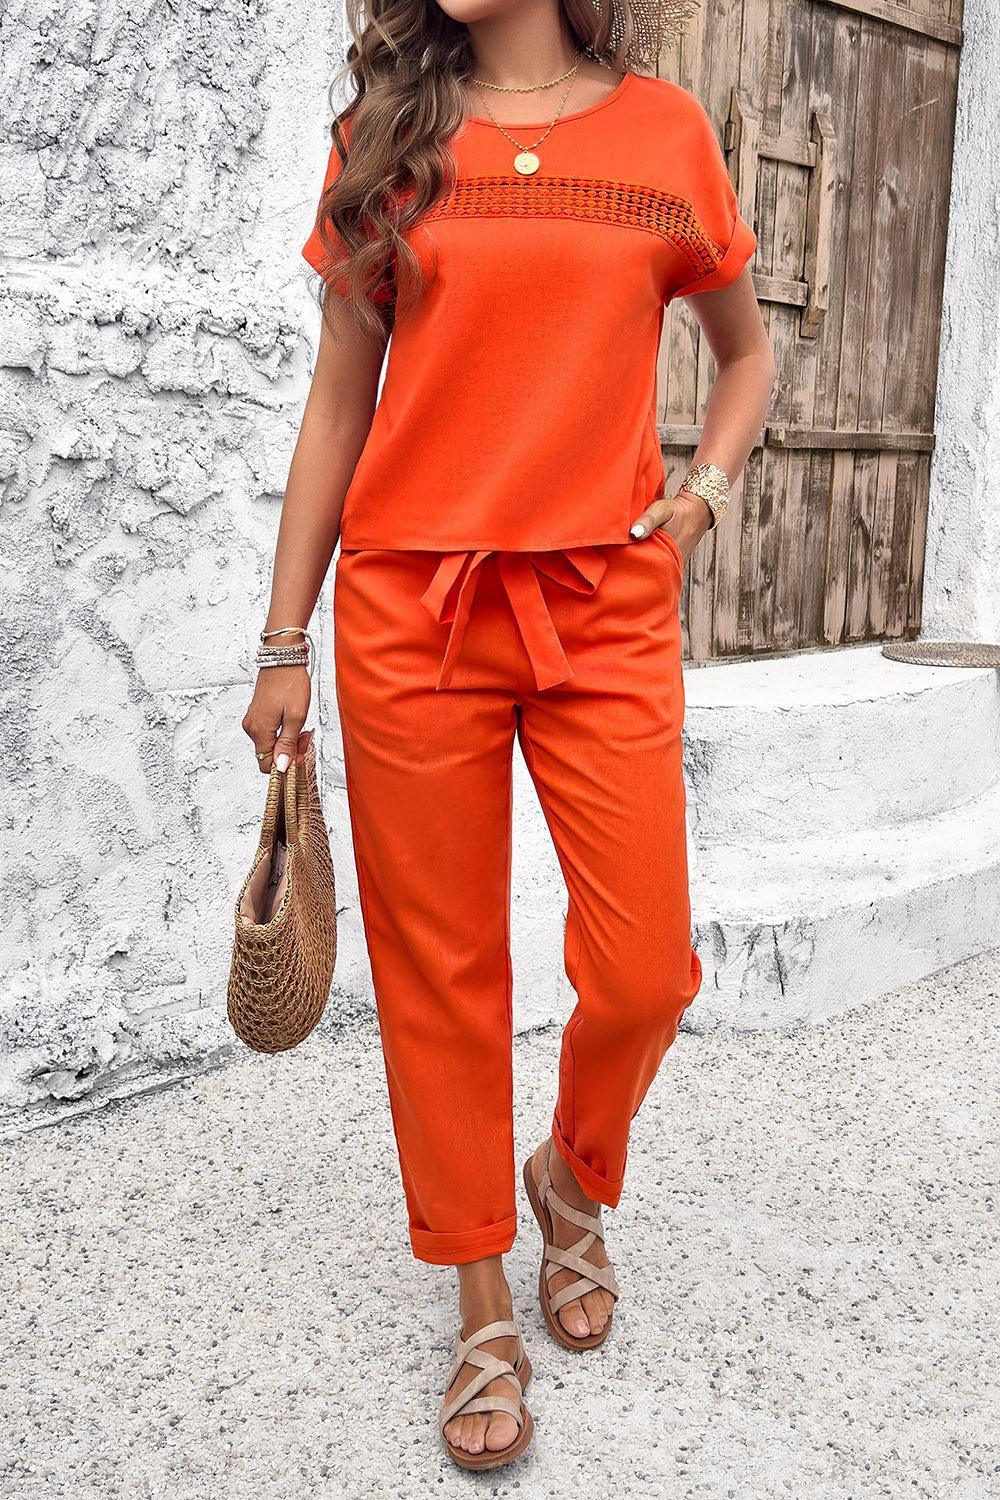 a woman in an orange top and orange pants